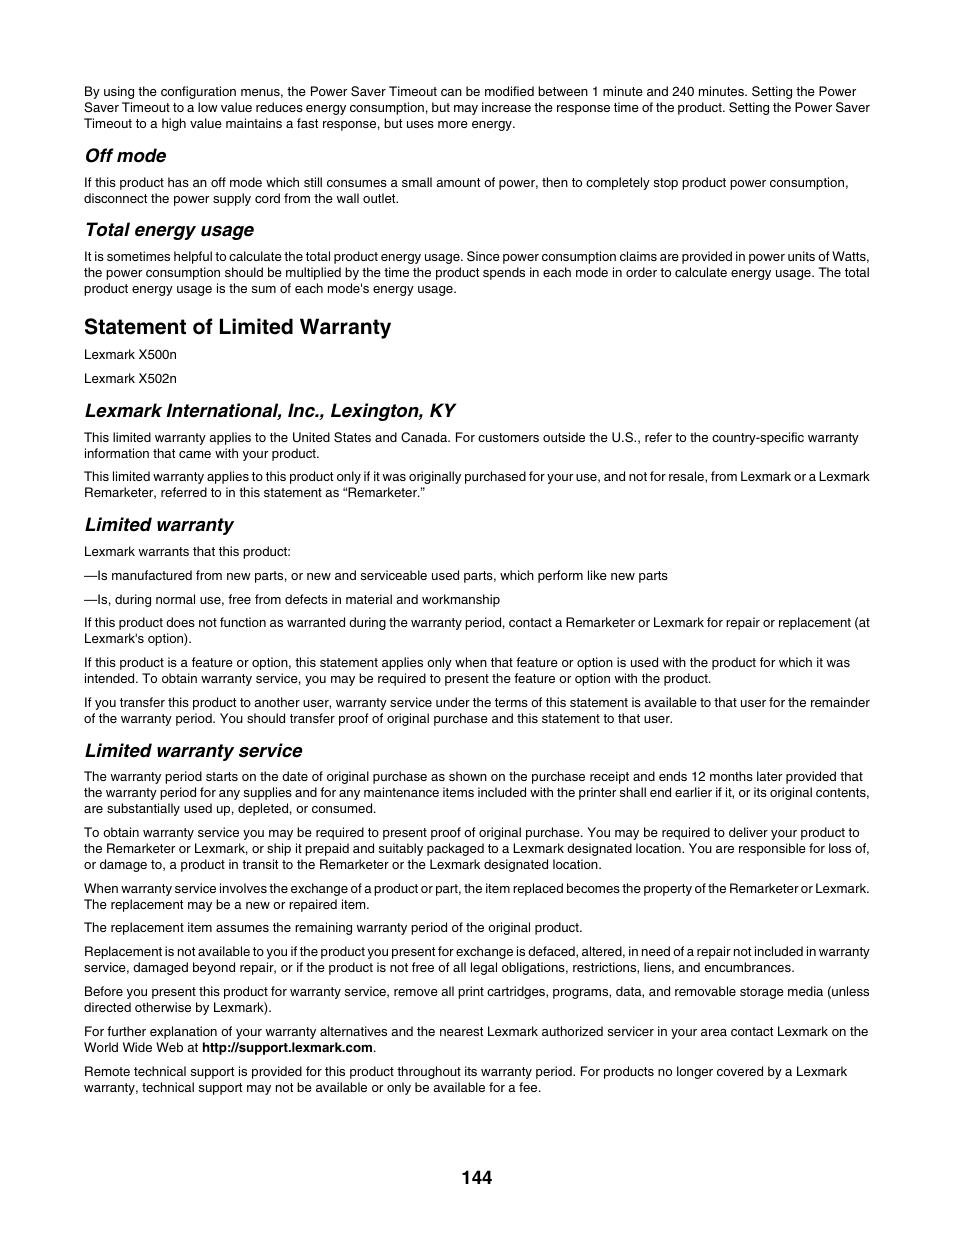 Off mode, Total energy usage, Statement of limited warranty | Lexmark international, inc., lexington, ky, Limited warranty, Limited warranty service | Lexmark X500N User Manual | Page 144 / 150